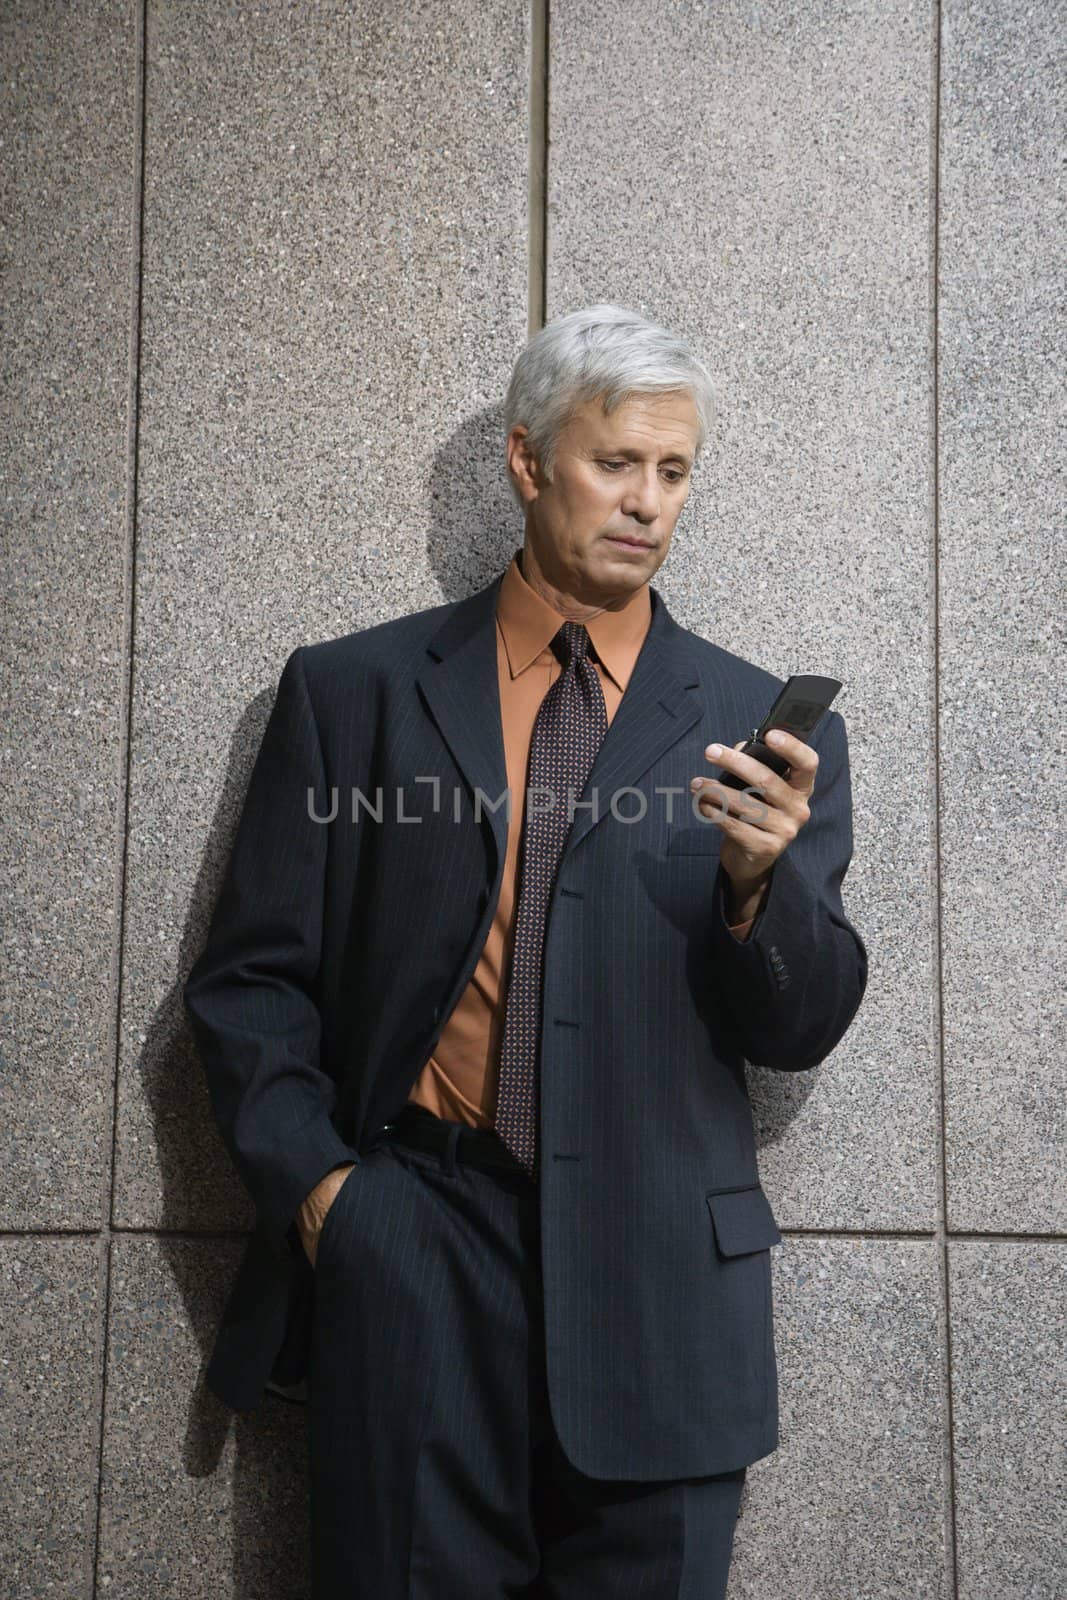 Caucasian middle aged businessman looking down at cell phone.